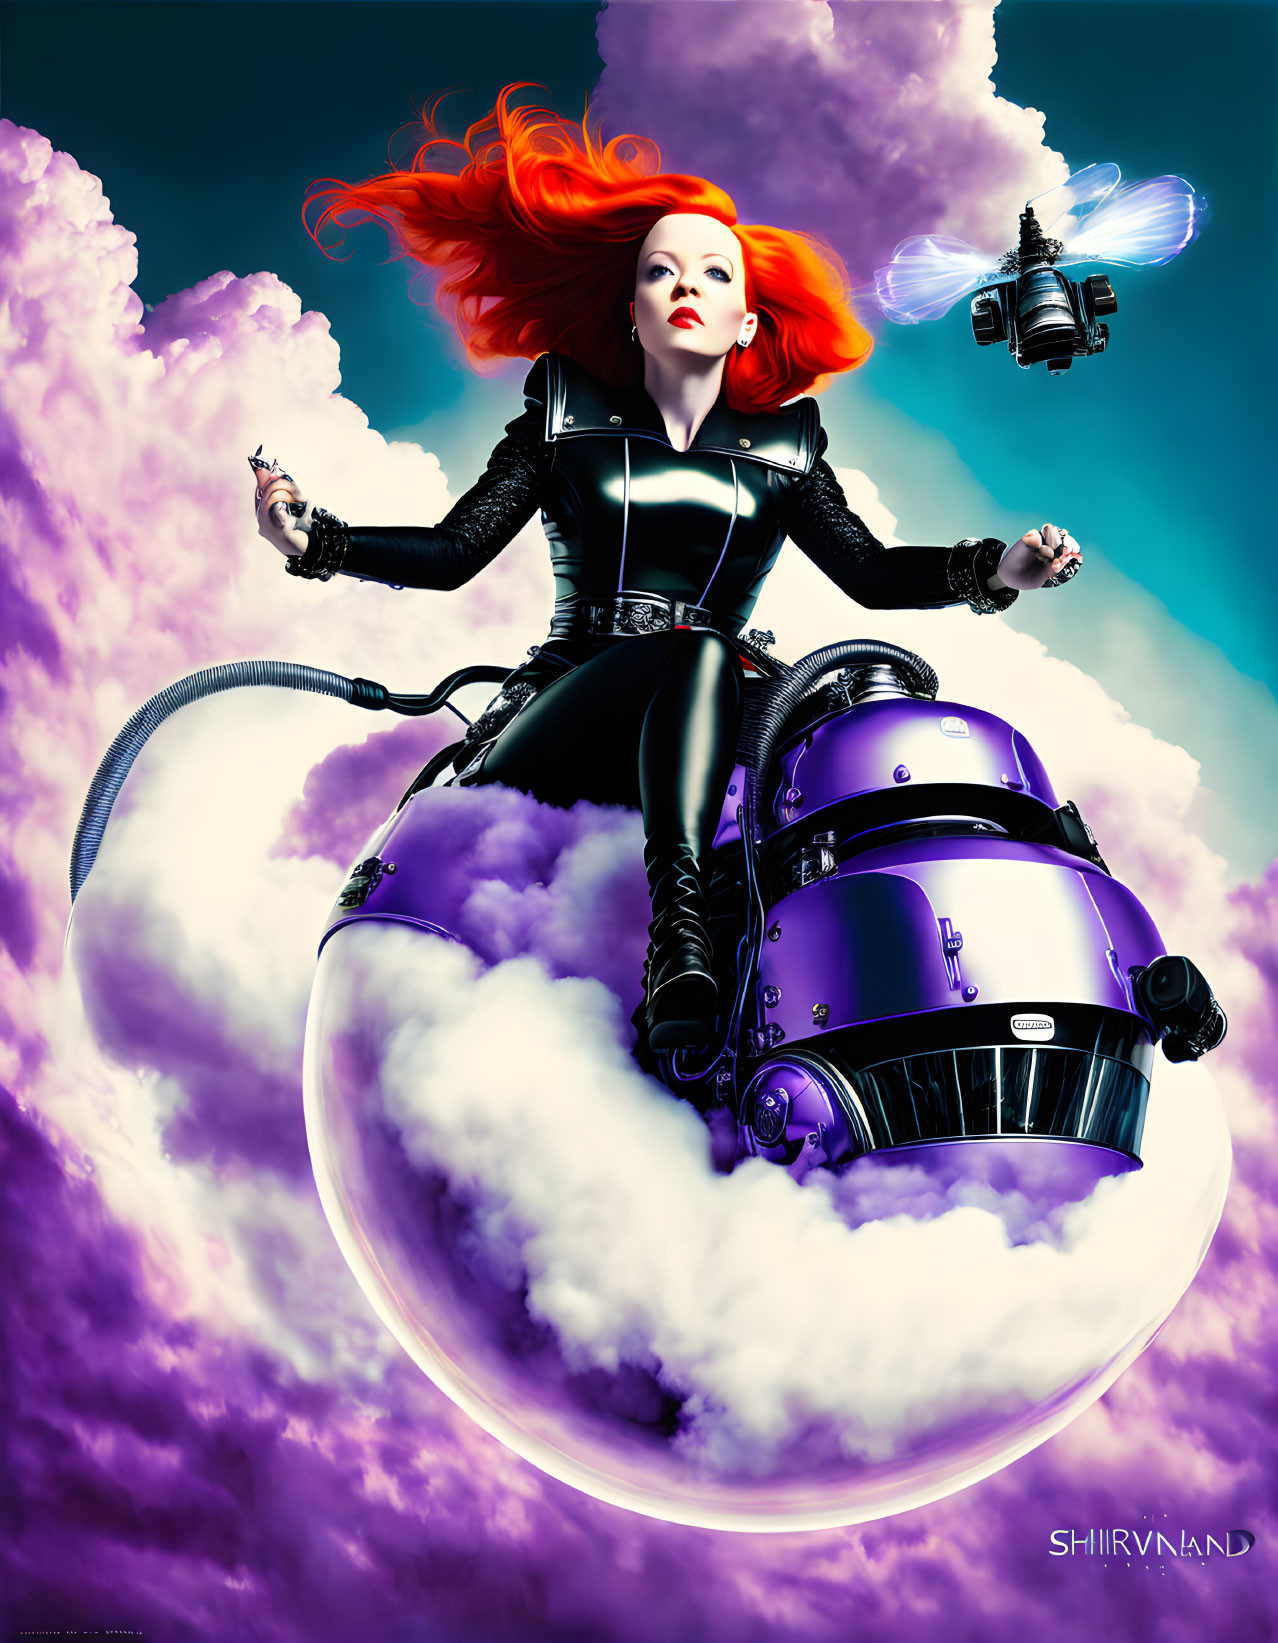 Red-haired woman on purple futuristic motorcycle in sky with drone